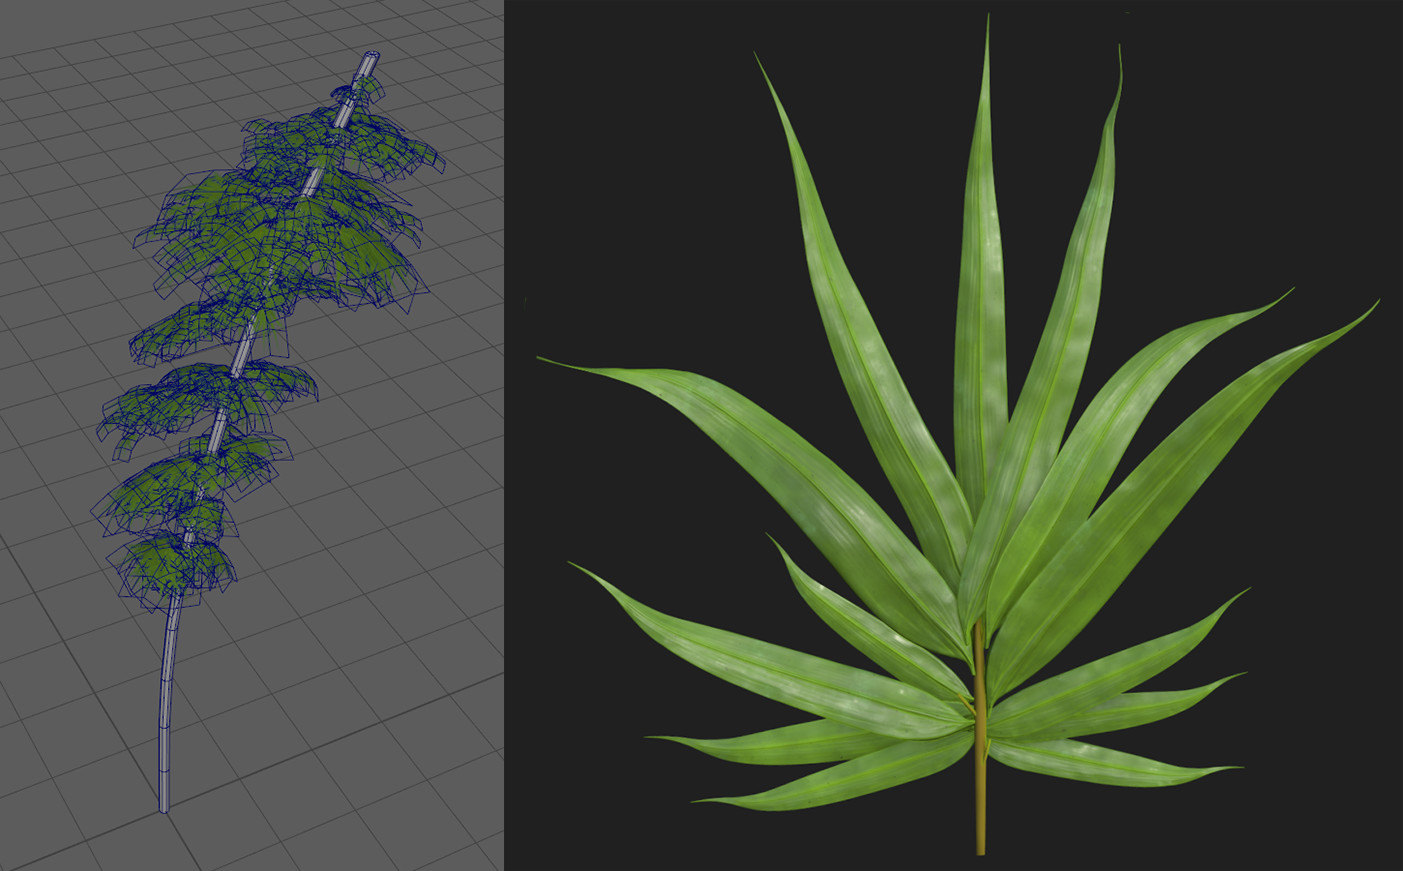 Screenshot from Maya to the left. Shows a foliage that is to be a bamboo. To the right is a Substance Designer screenshot showing a baked down leaf. To be used as foliage cards on the image to the left.